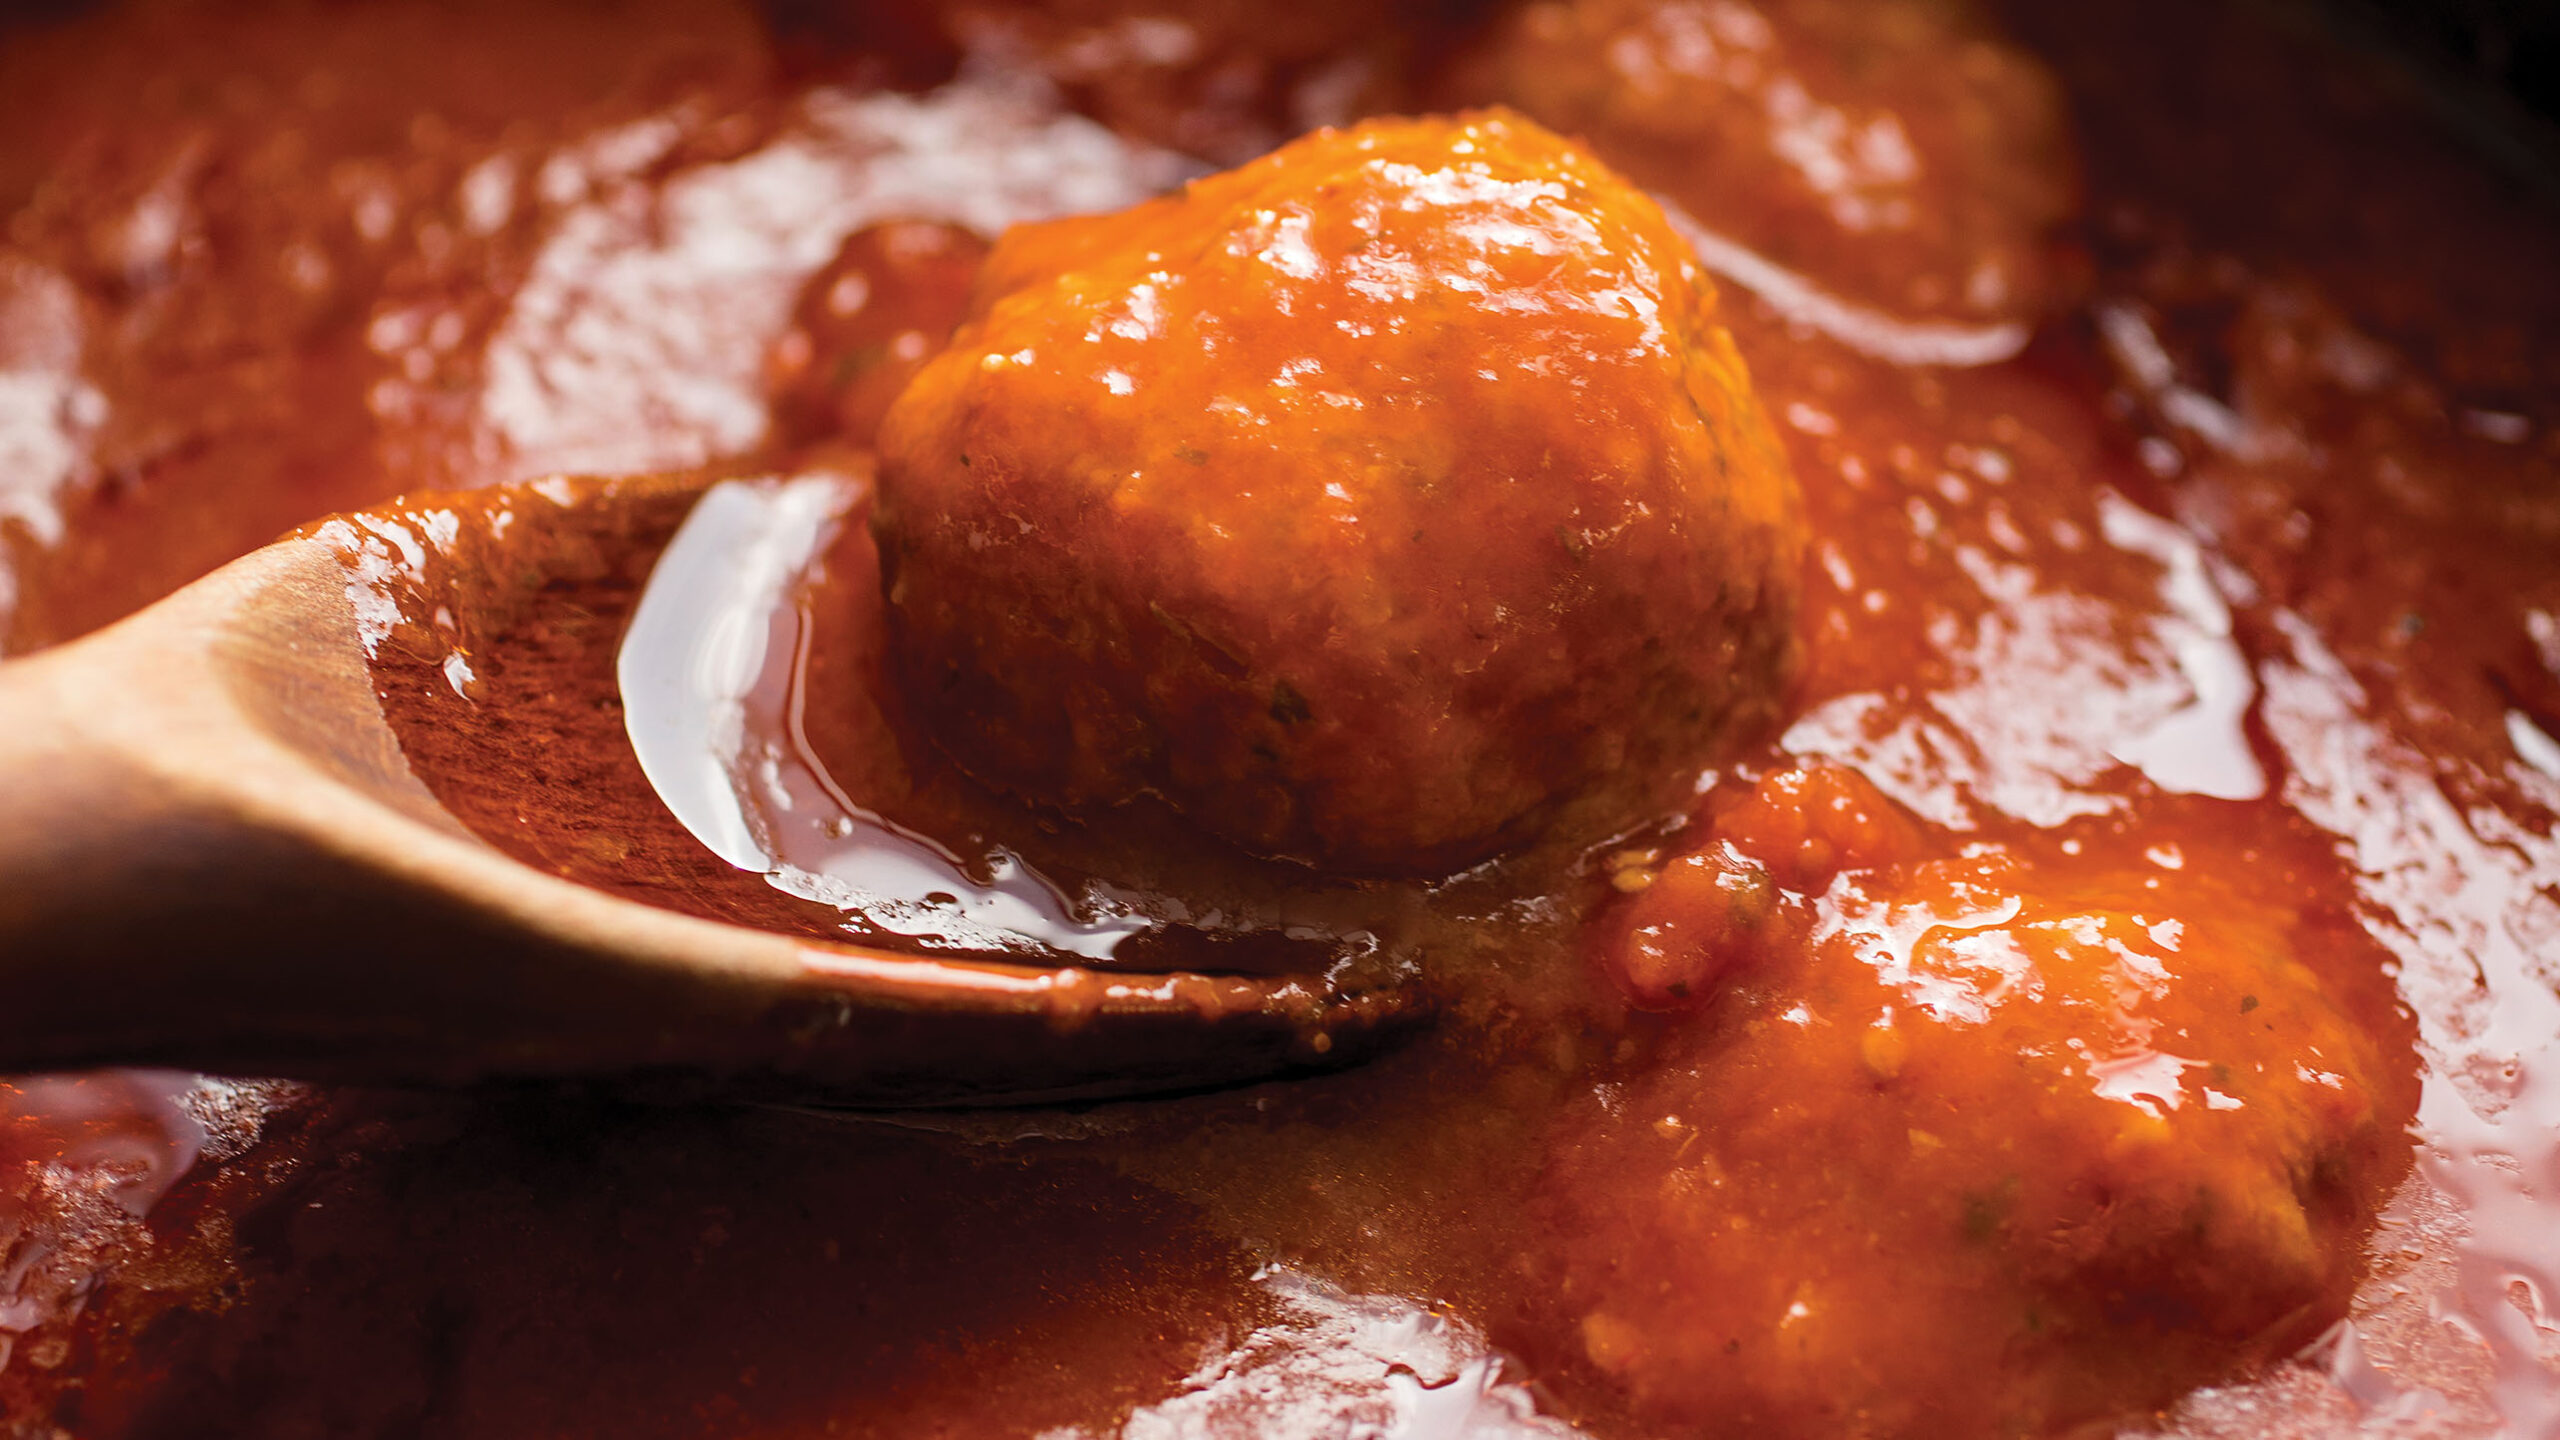 Gina's Brodo di Mama e Polpette (Meatballs with Tomato Sauce) recipe Excerpted from Heirloom Kitchen: Heritage Recipes and Family Stories from the Tables of Immigrant Women by Anna Francese Gass © 2019 Anna Francese Gass. Photos © 2019 by Andrew Scrivani